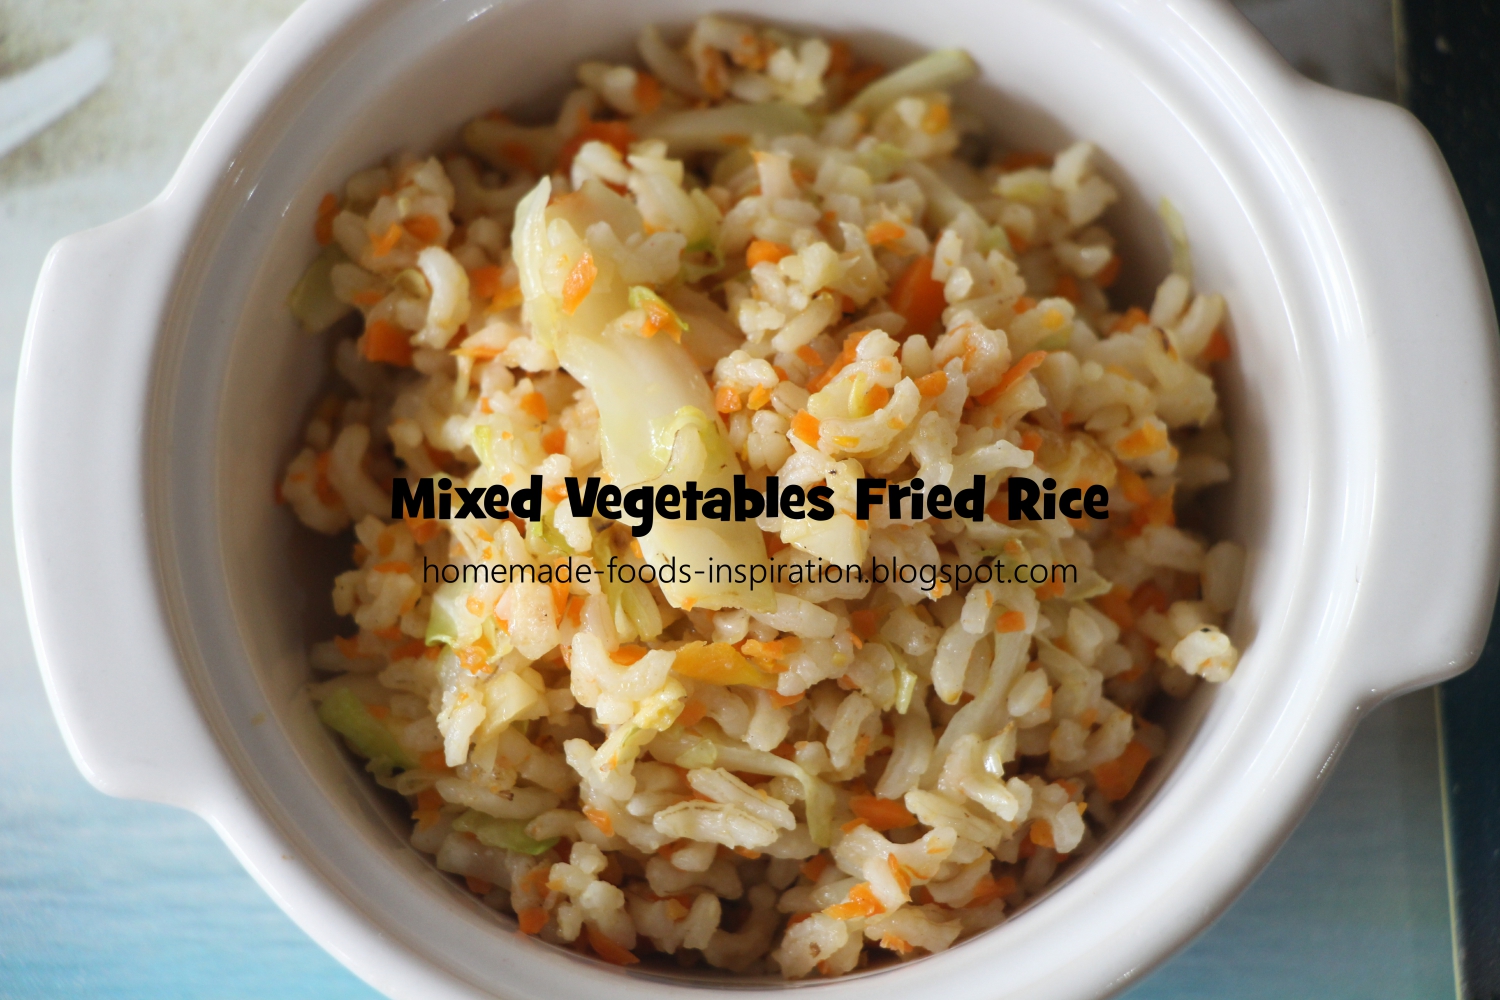 Homemade Foods Inspiration: Mixed Vegetables Fried Rice